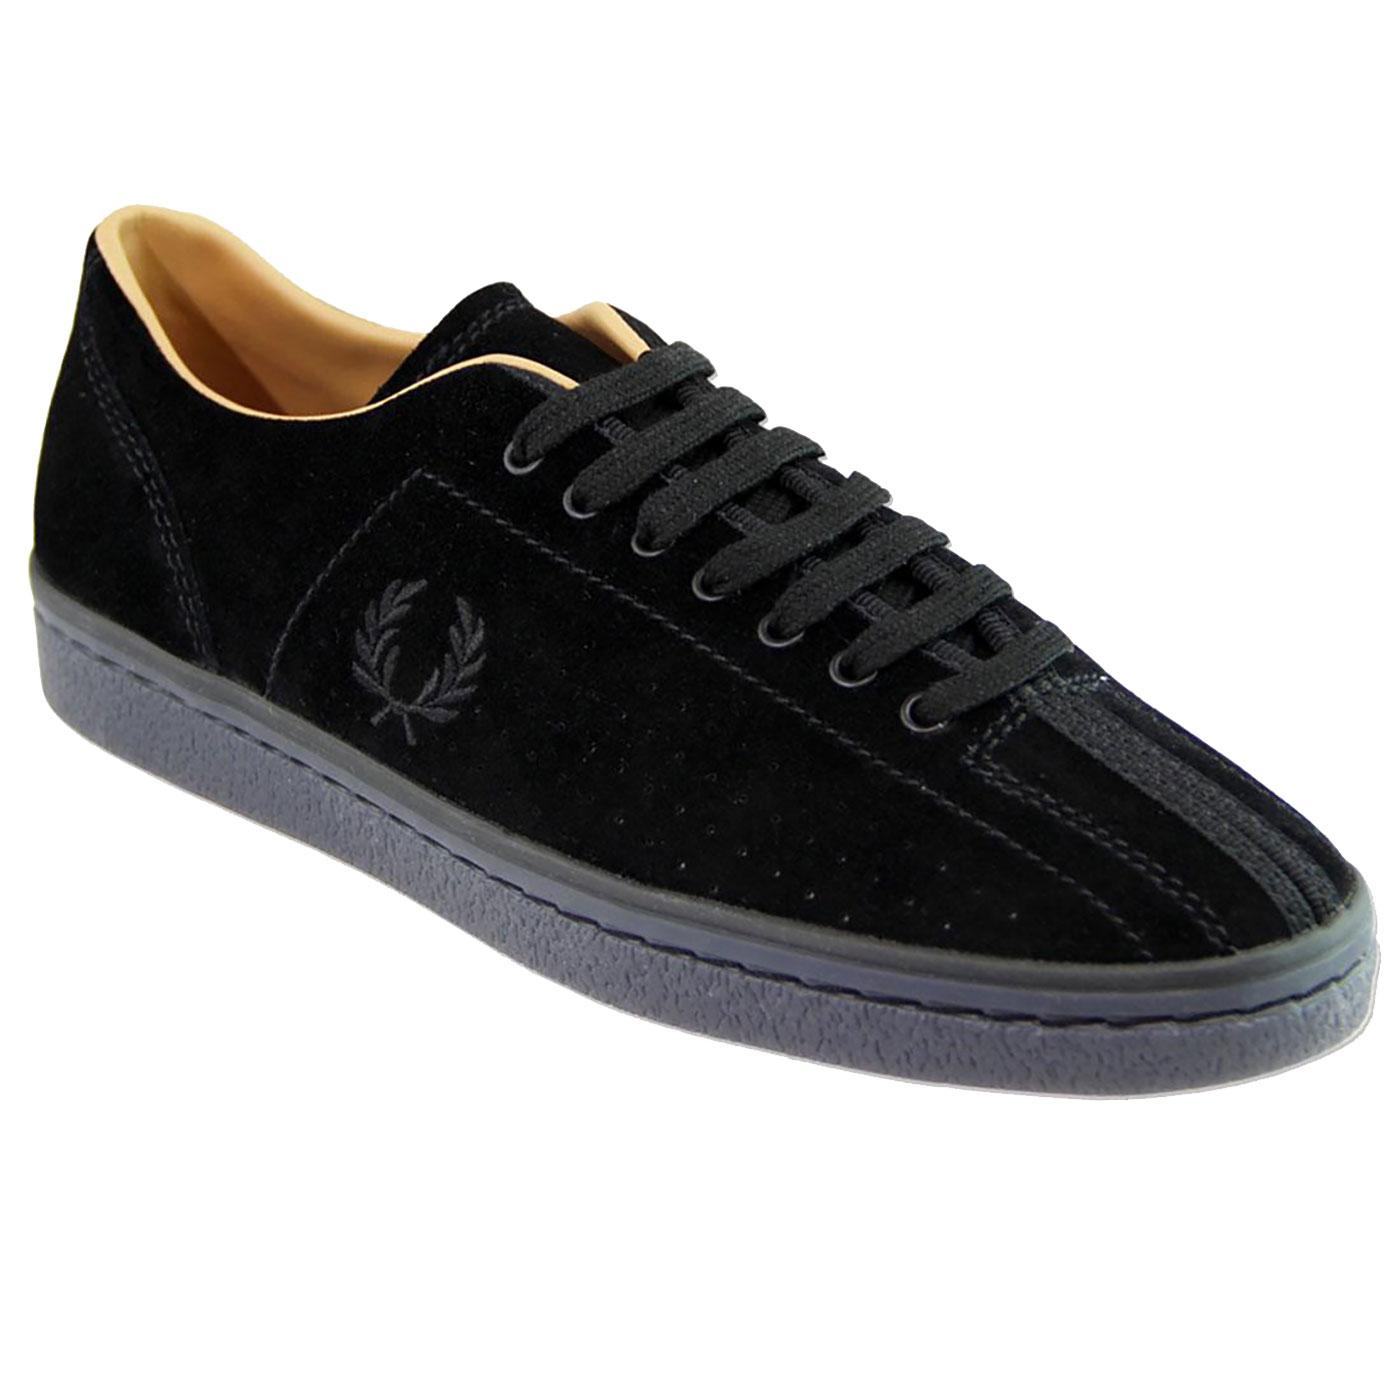 FRED PERRY 'Stamford' Suede Bowling 